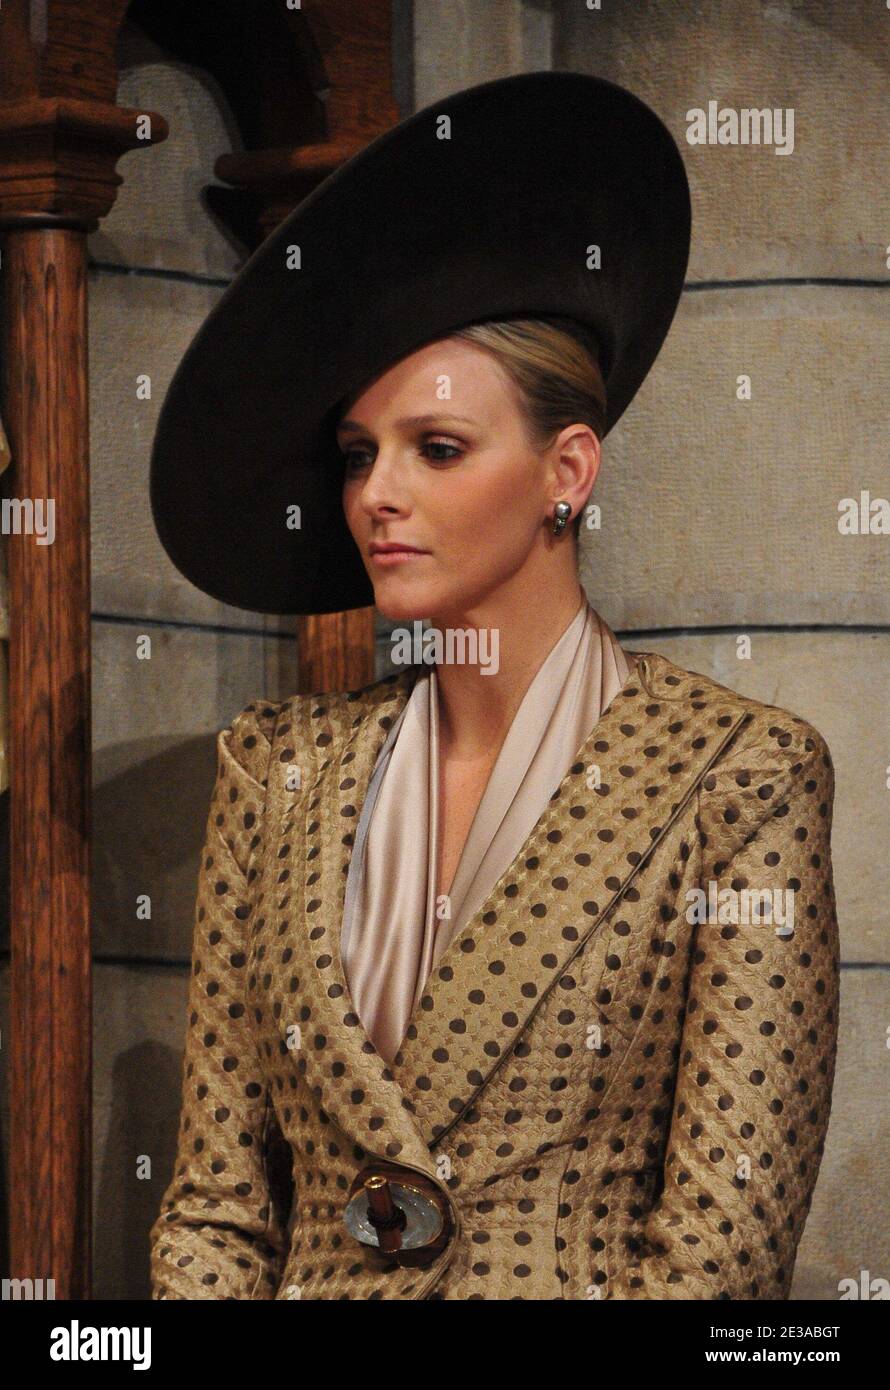 Charlene Wittstock (wearing Armani Prive Fall-Winter 2010/2011) attending mass in the cathedral as part of the National Day's celebrations in Monaco on November 19, 2010. Photo by Frederic Nebinger/ABACAPRESS.COM Stock Photo